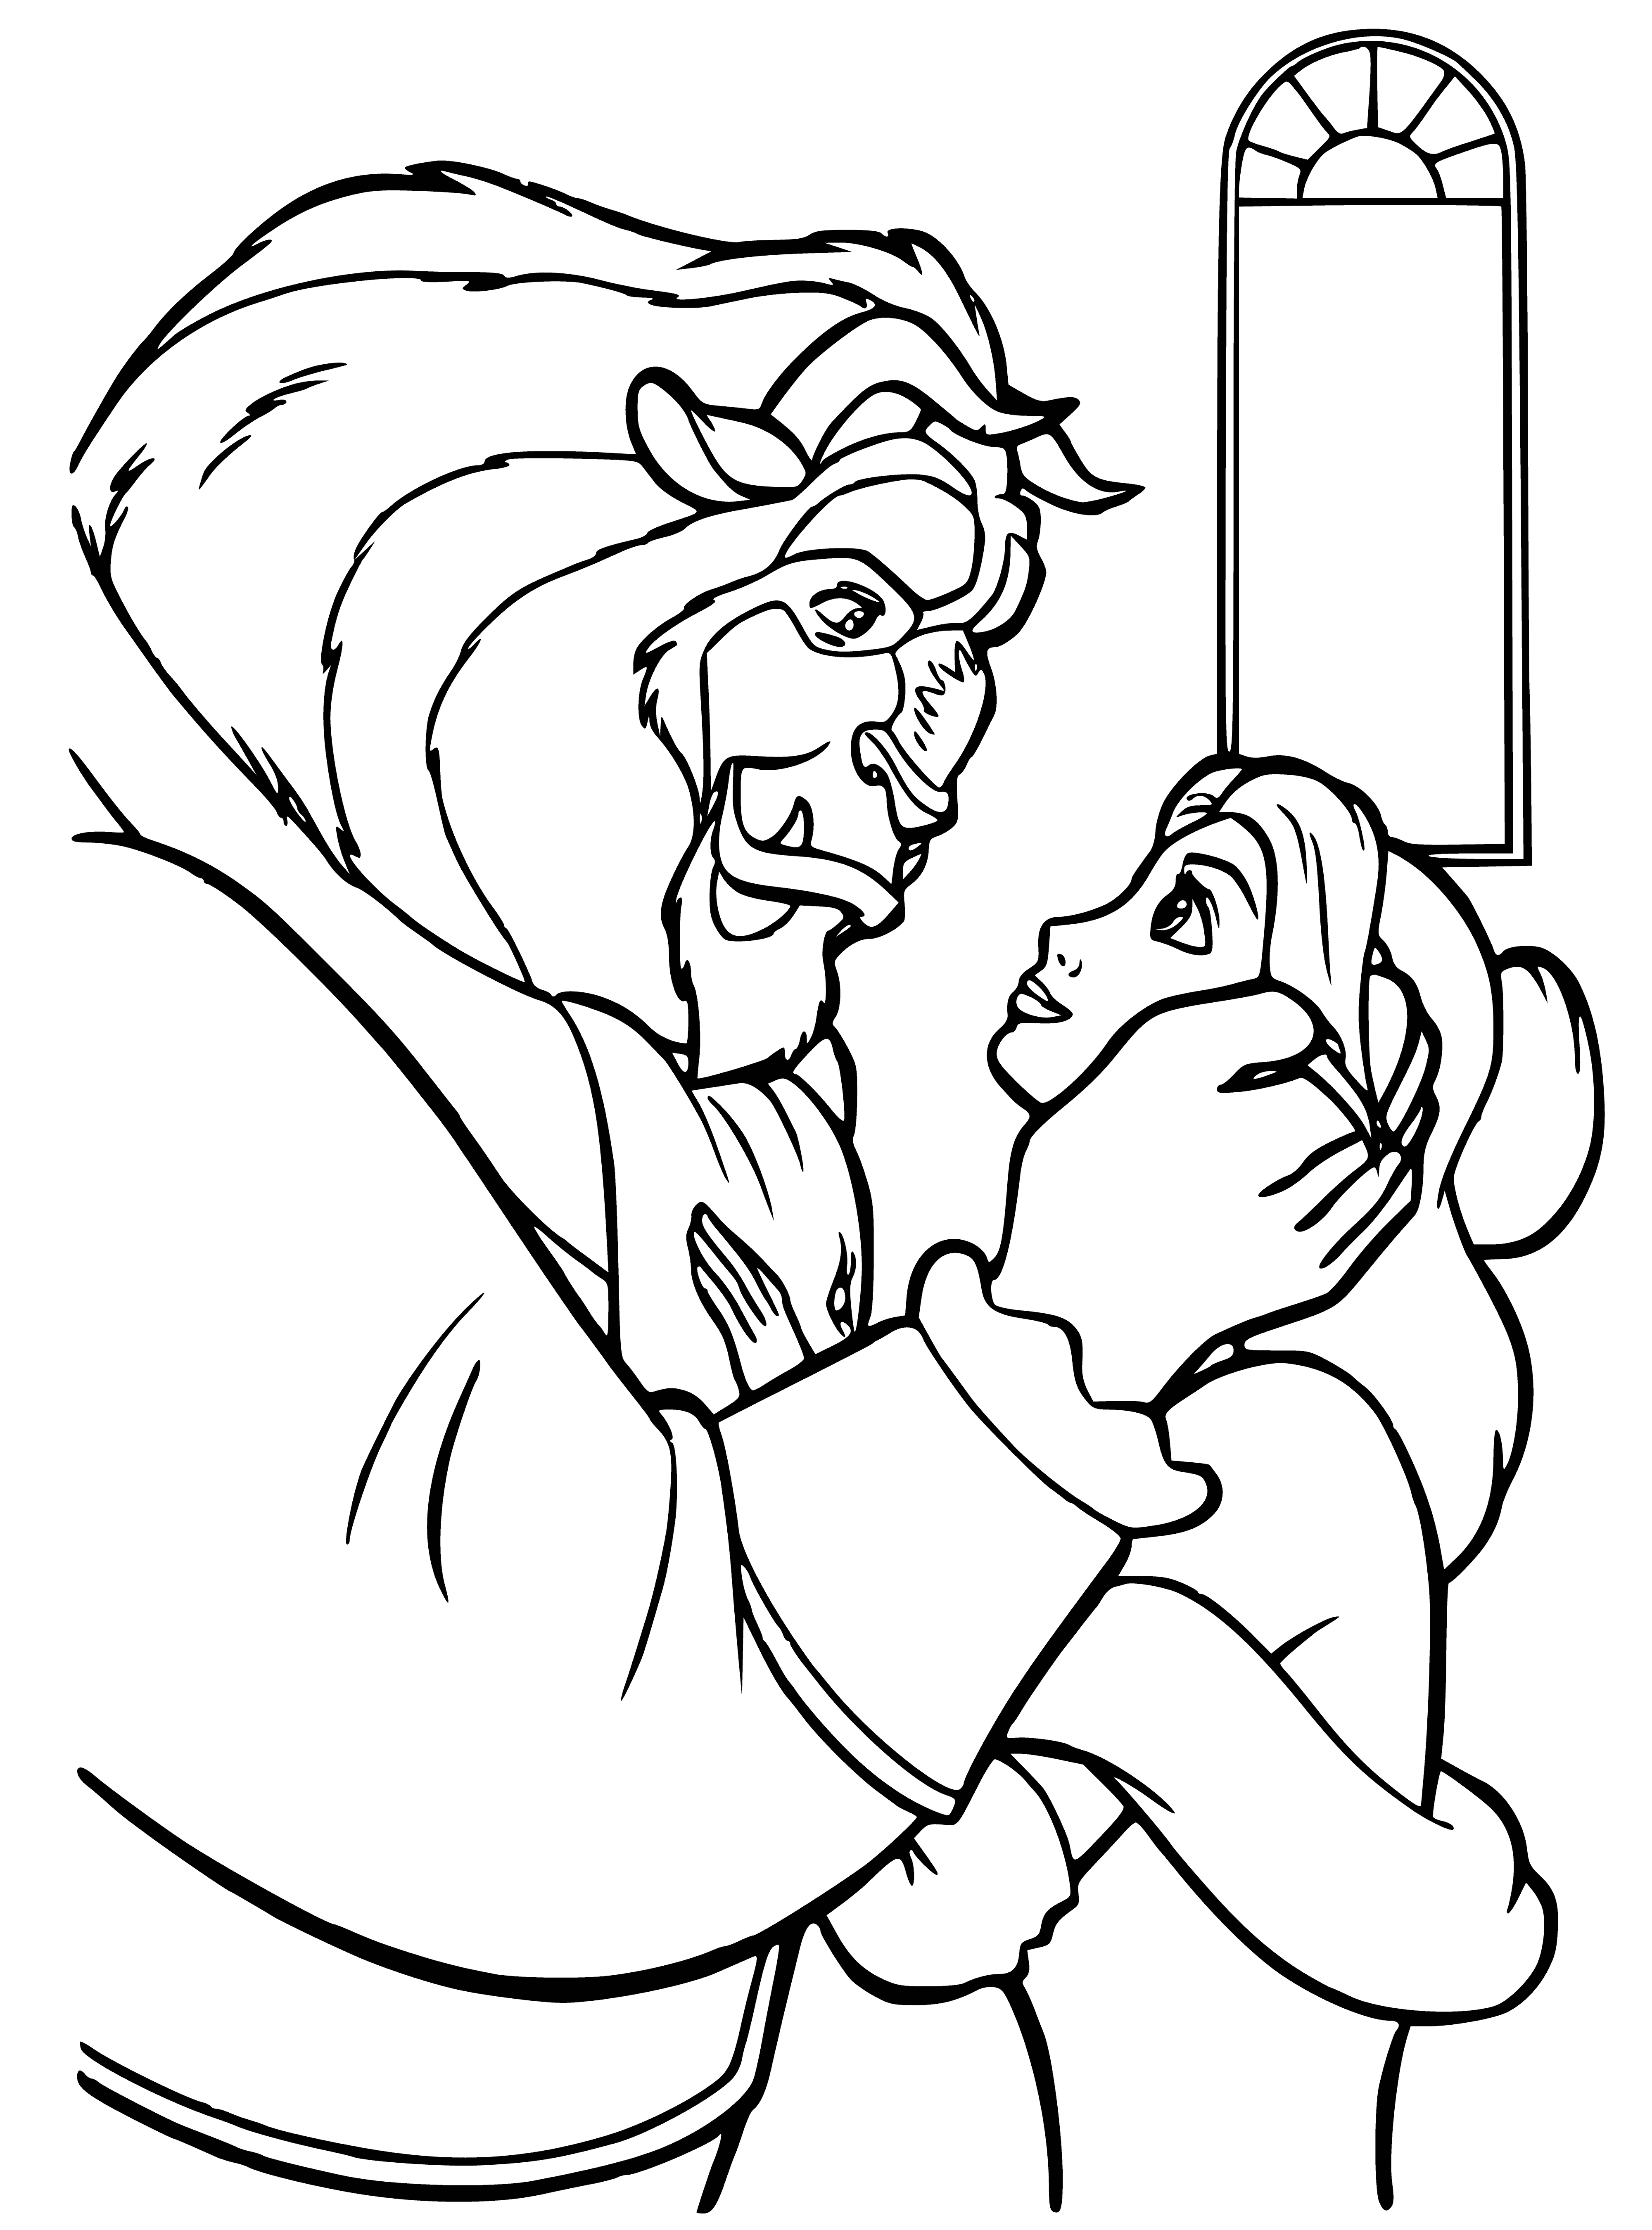 Love coloring page